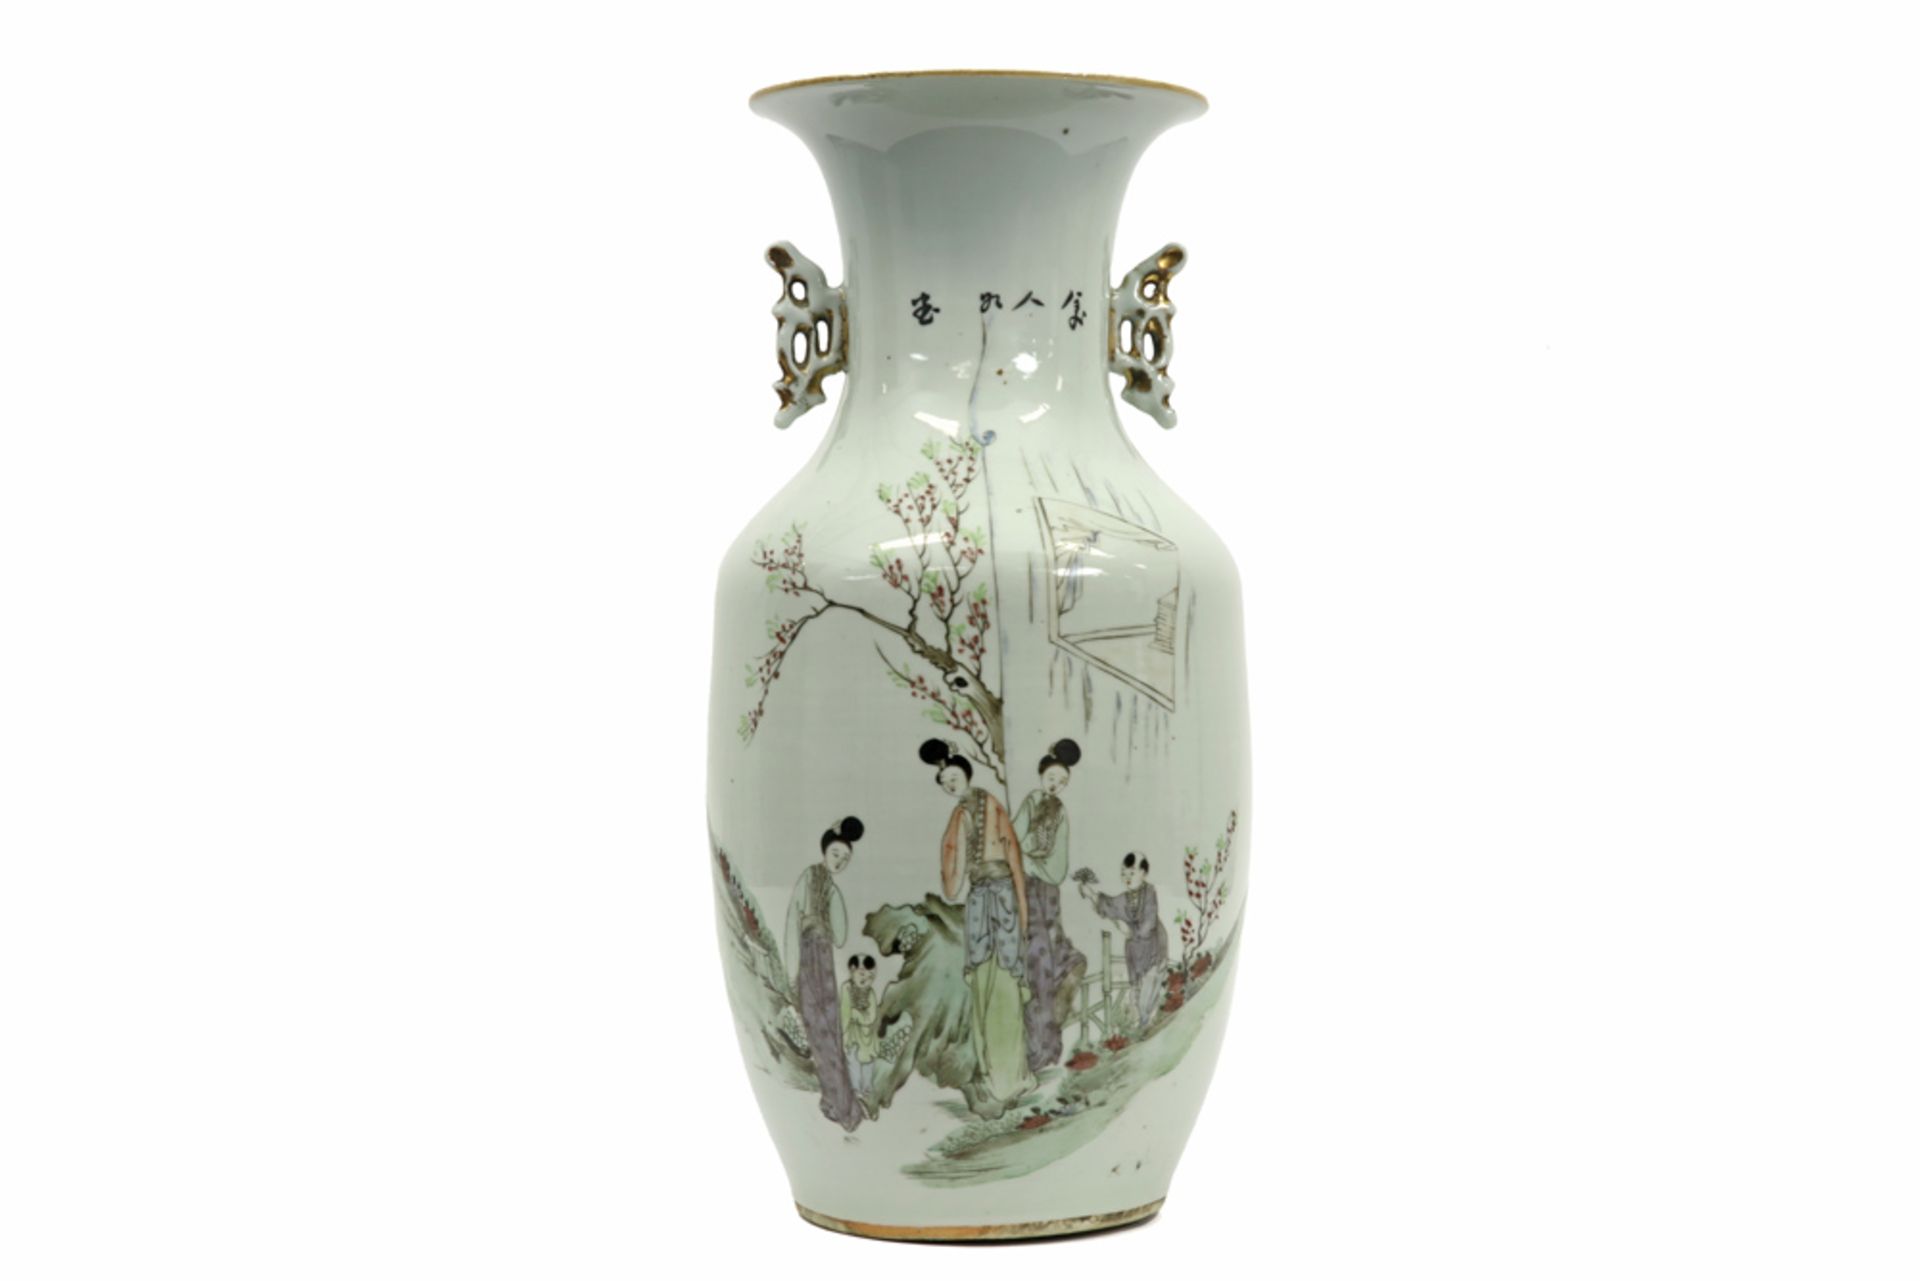 Chinese Republic period vase in porcelain with a polychrome decor with women and children || Chinese